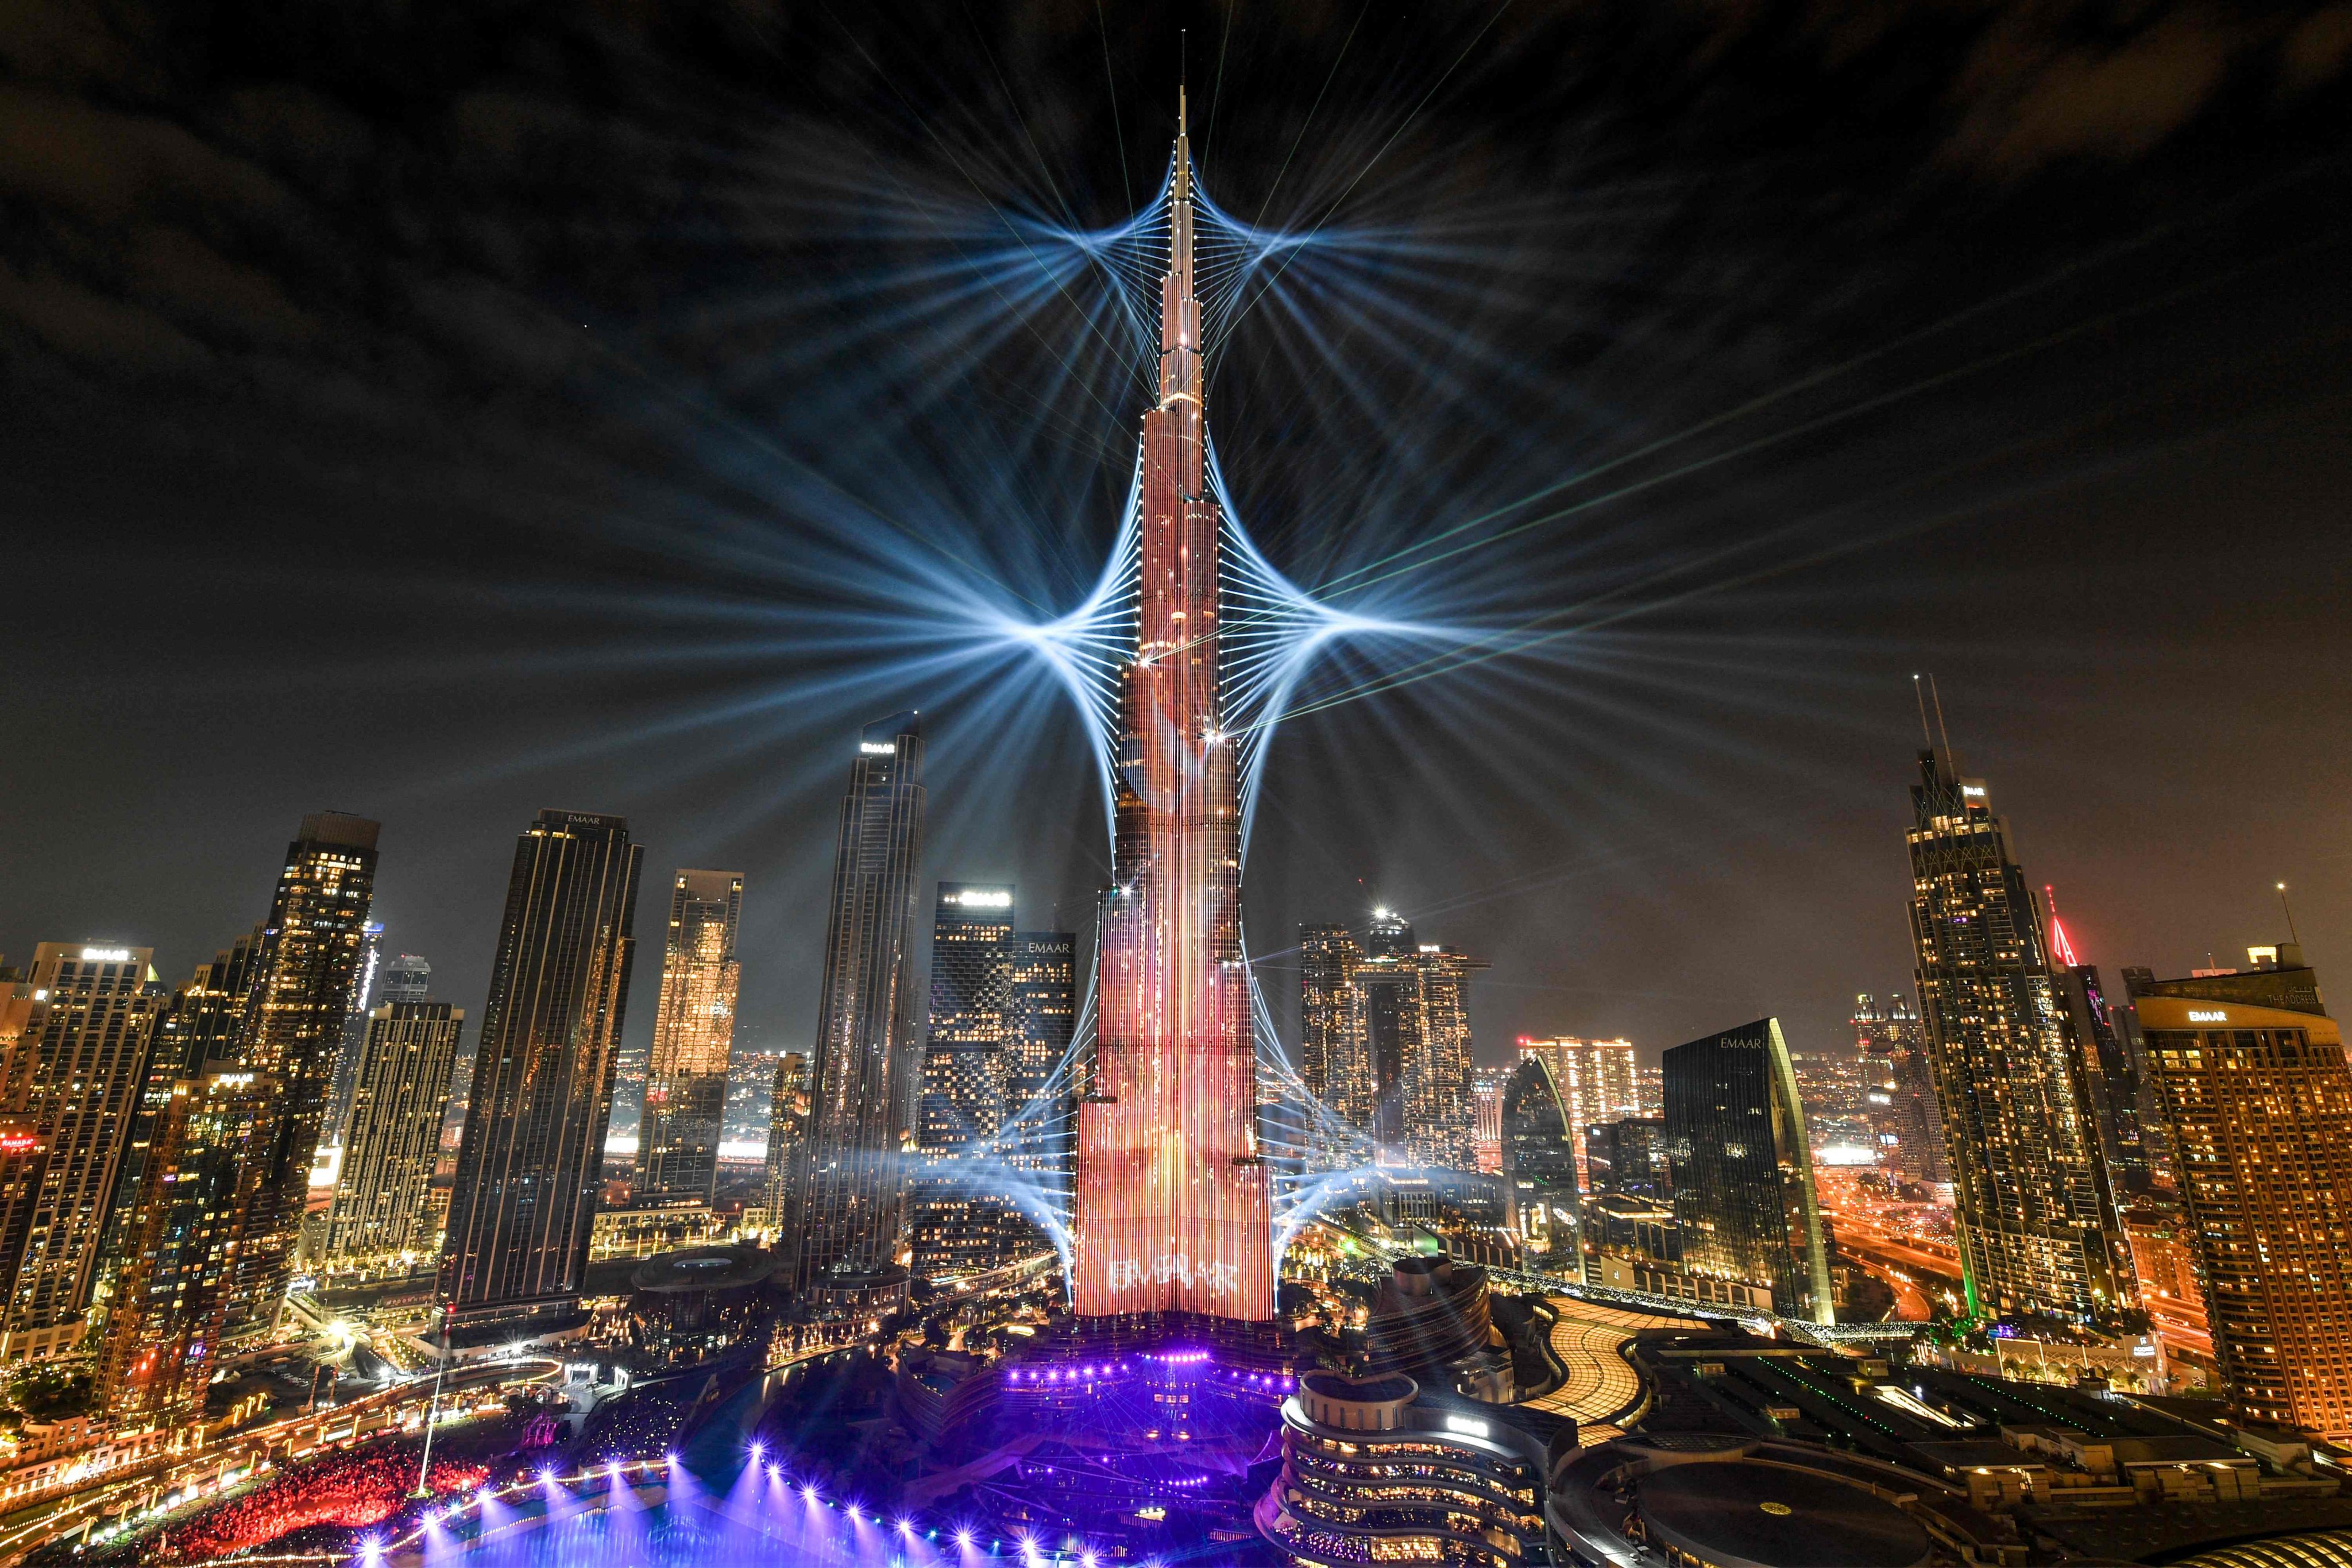 The Burj Khalifa, the world’s tallest building, is lit up during New Year’s Eve celebrations in Dubai on December 31. The visionary and moderate approach of Dubai’s leaders has contributed to its prosperity. Photo: Reuters 